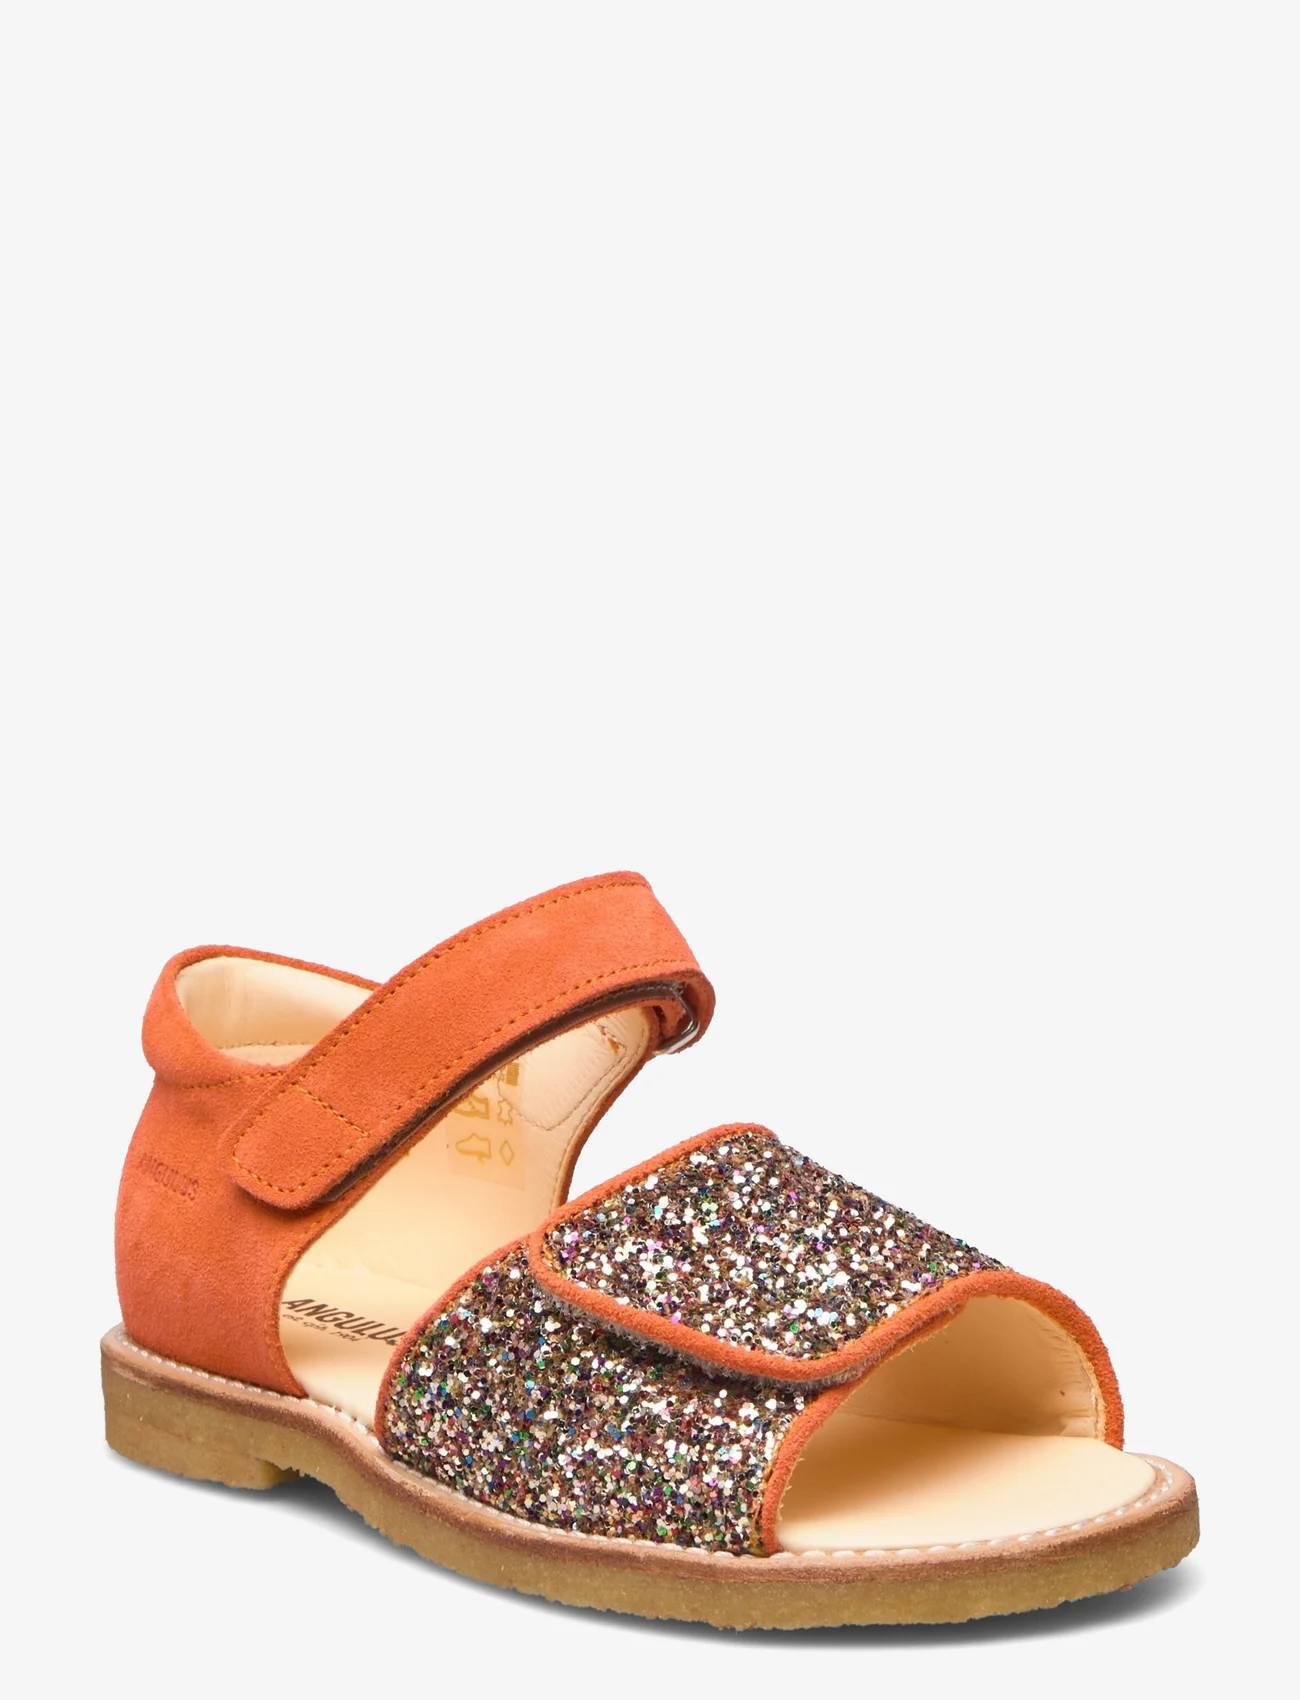 ANGULUS - Sandals - flat - open toe - clo - sommarfynd - 1141/2488 coral/multi glitter - 0